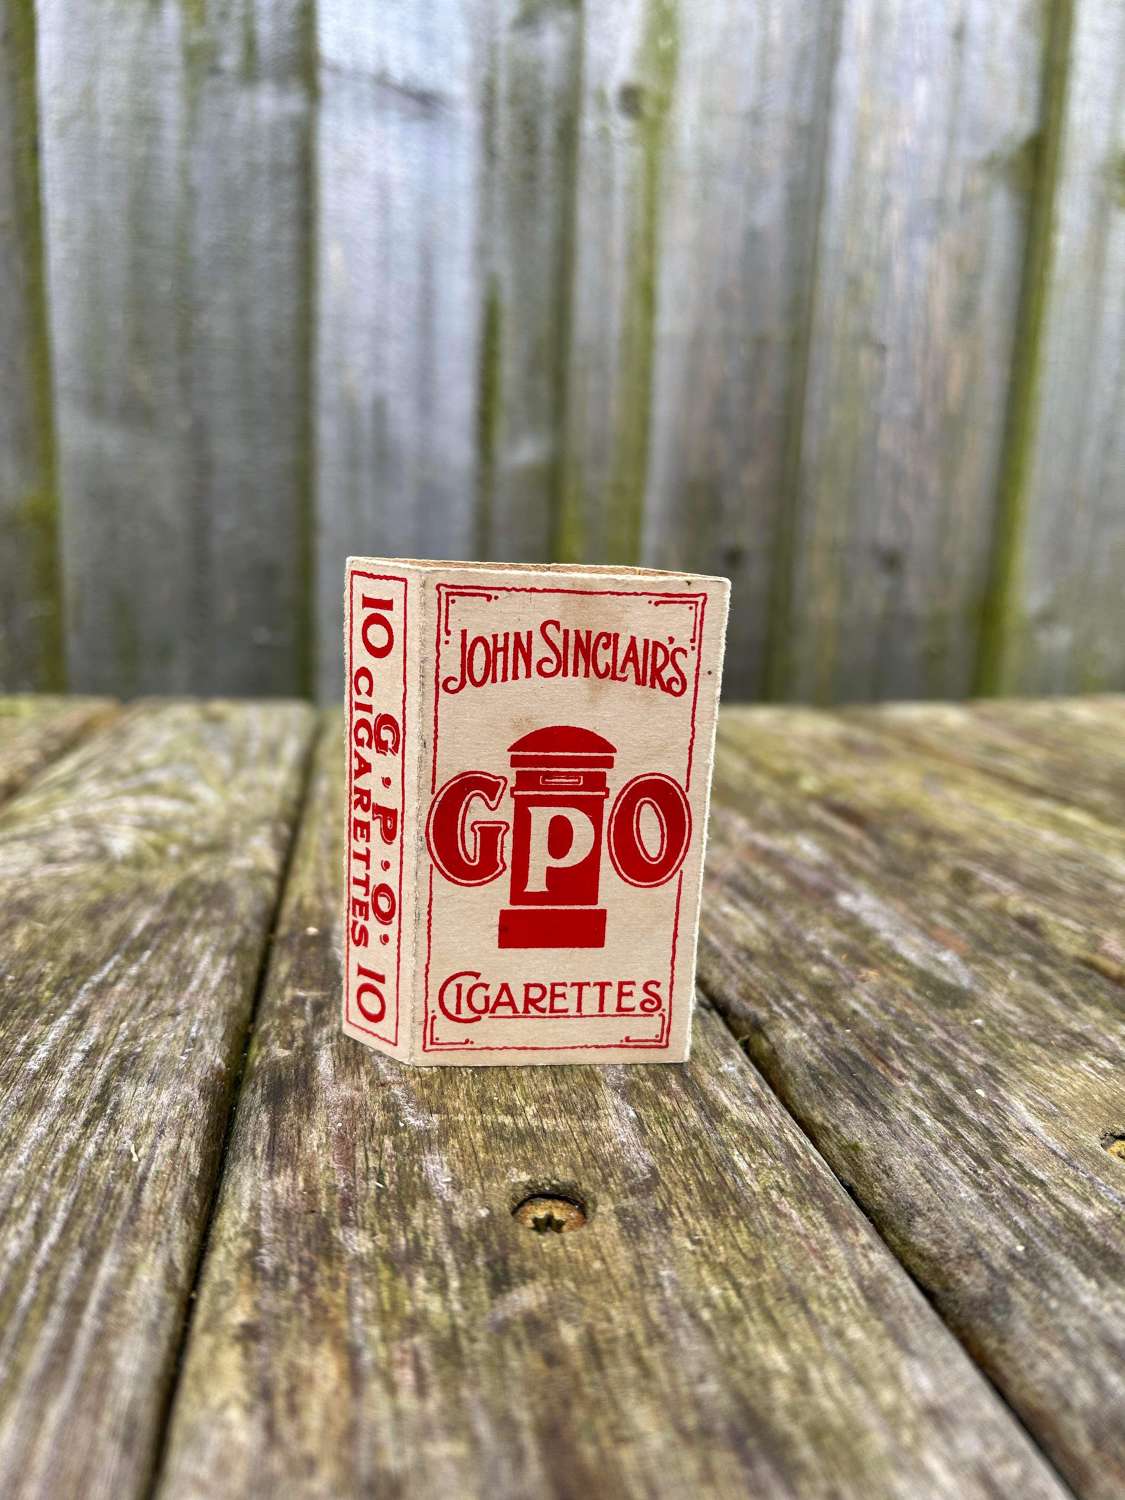 Unusual GPO cigarette packet by John Sinclair